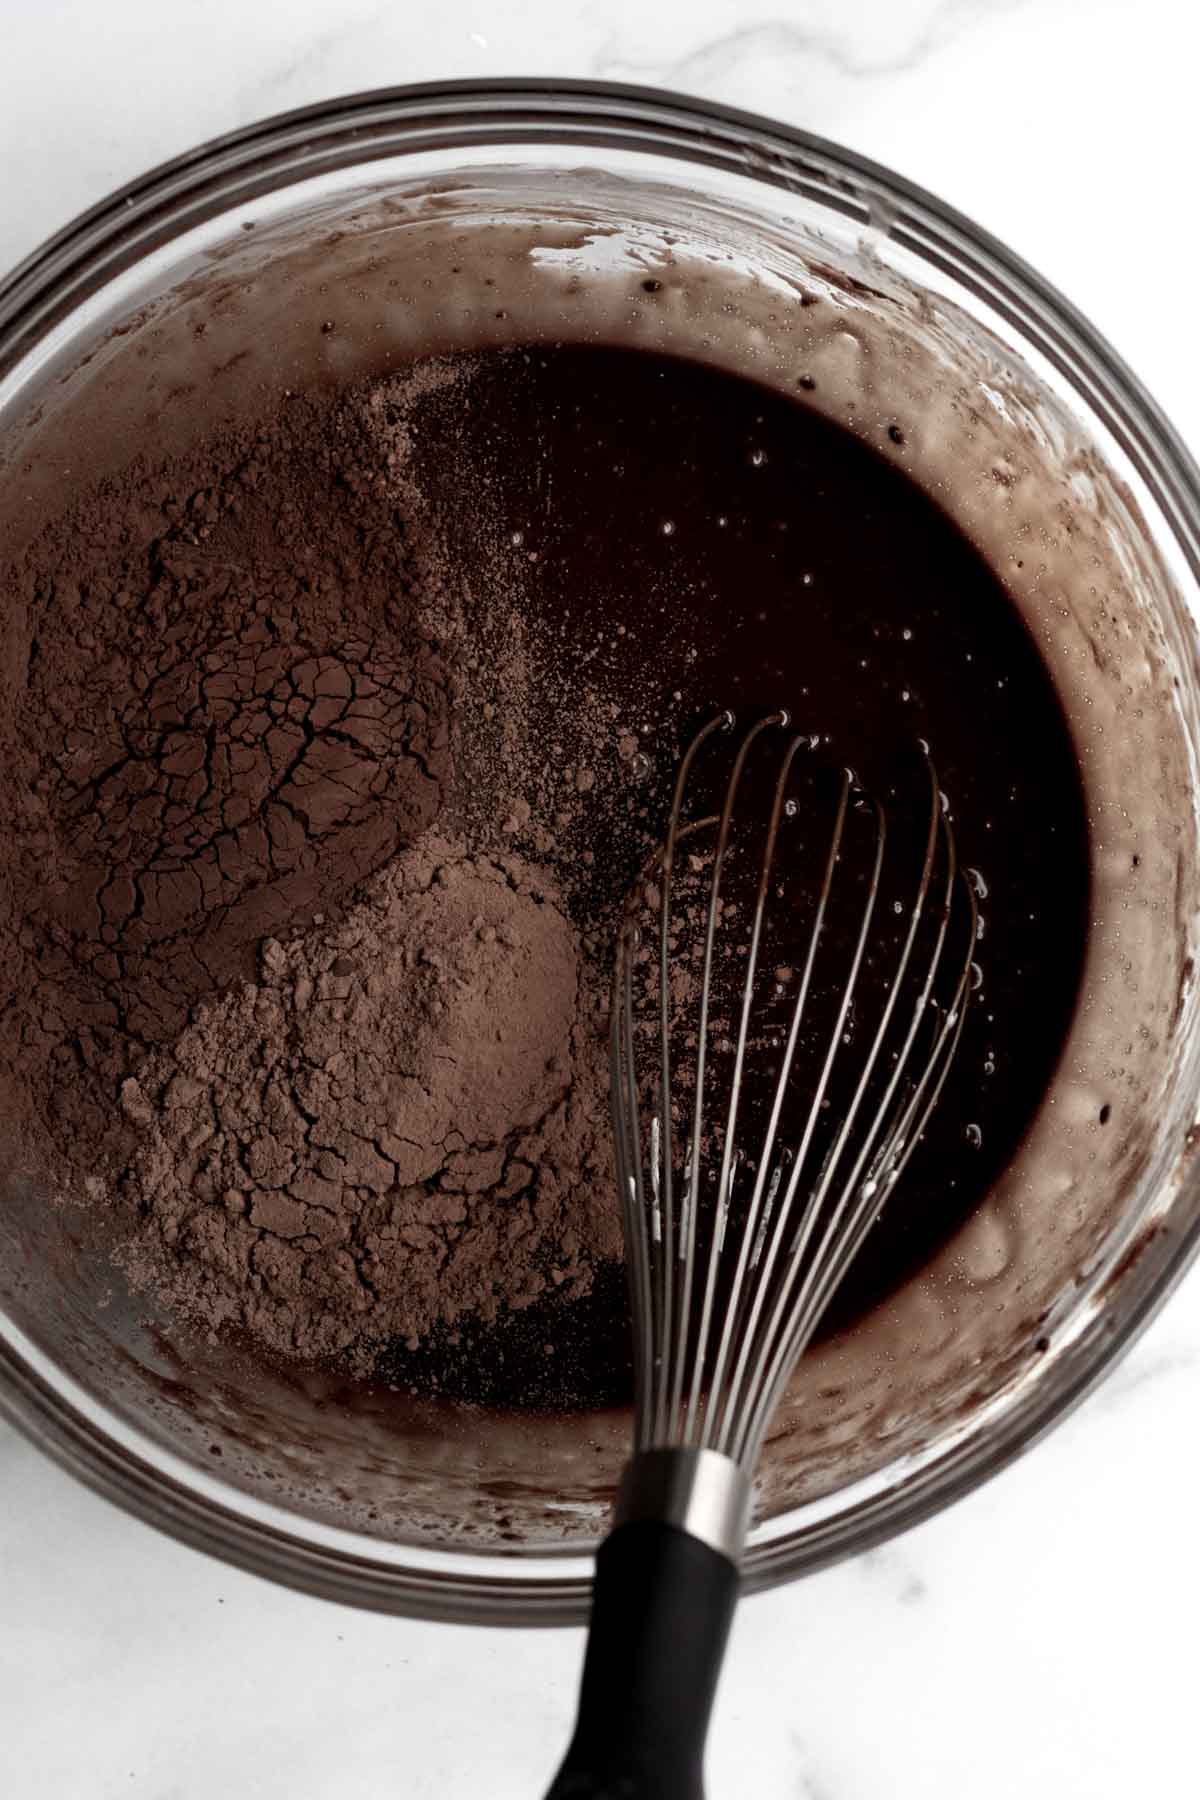 Adding in two cocoa powders with a whisk.